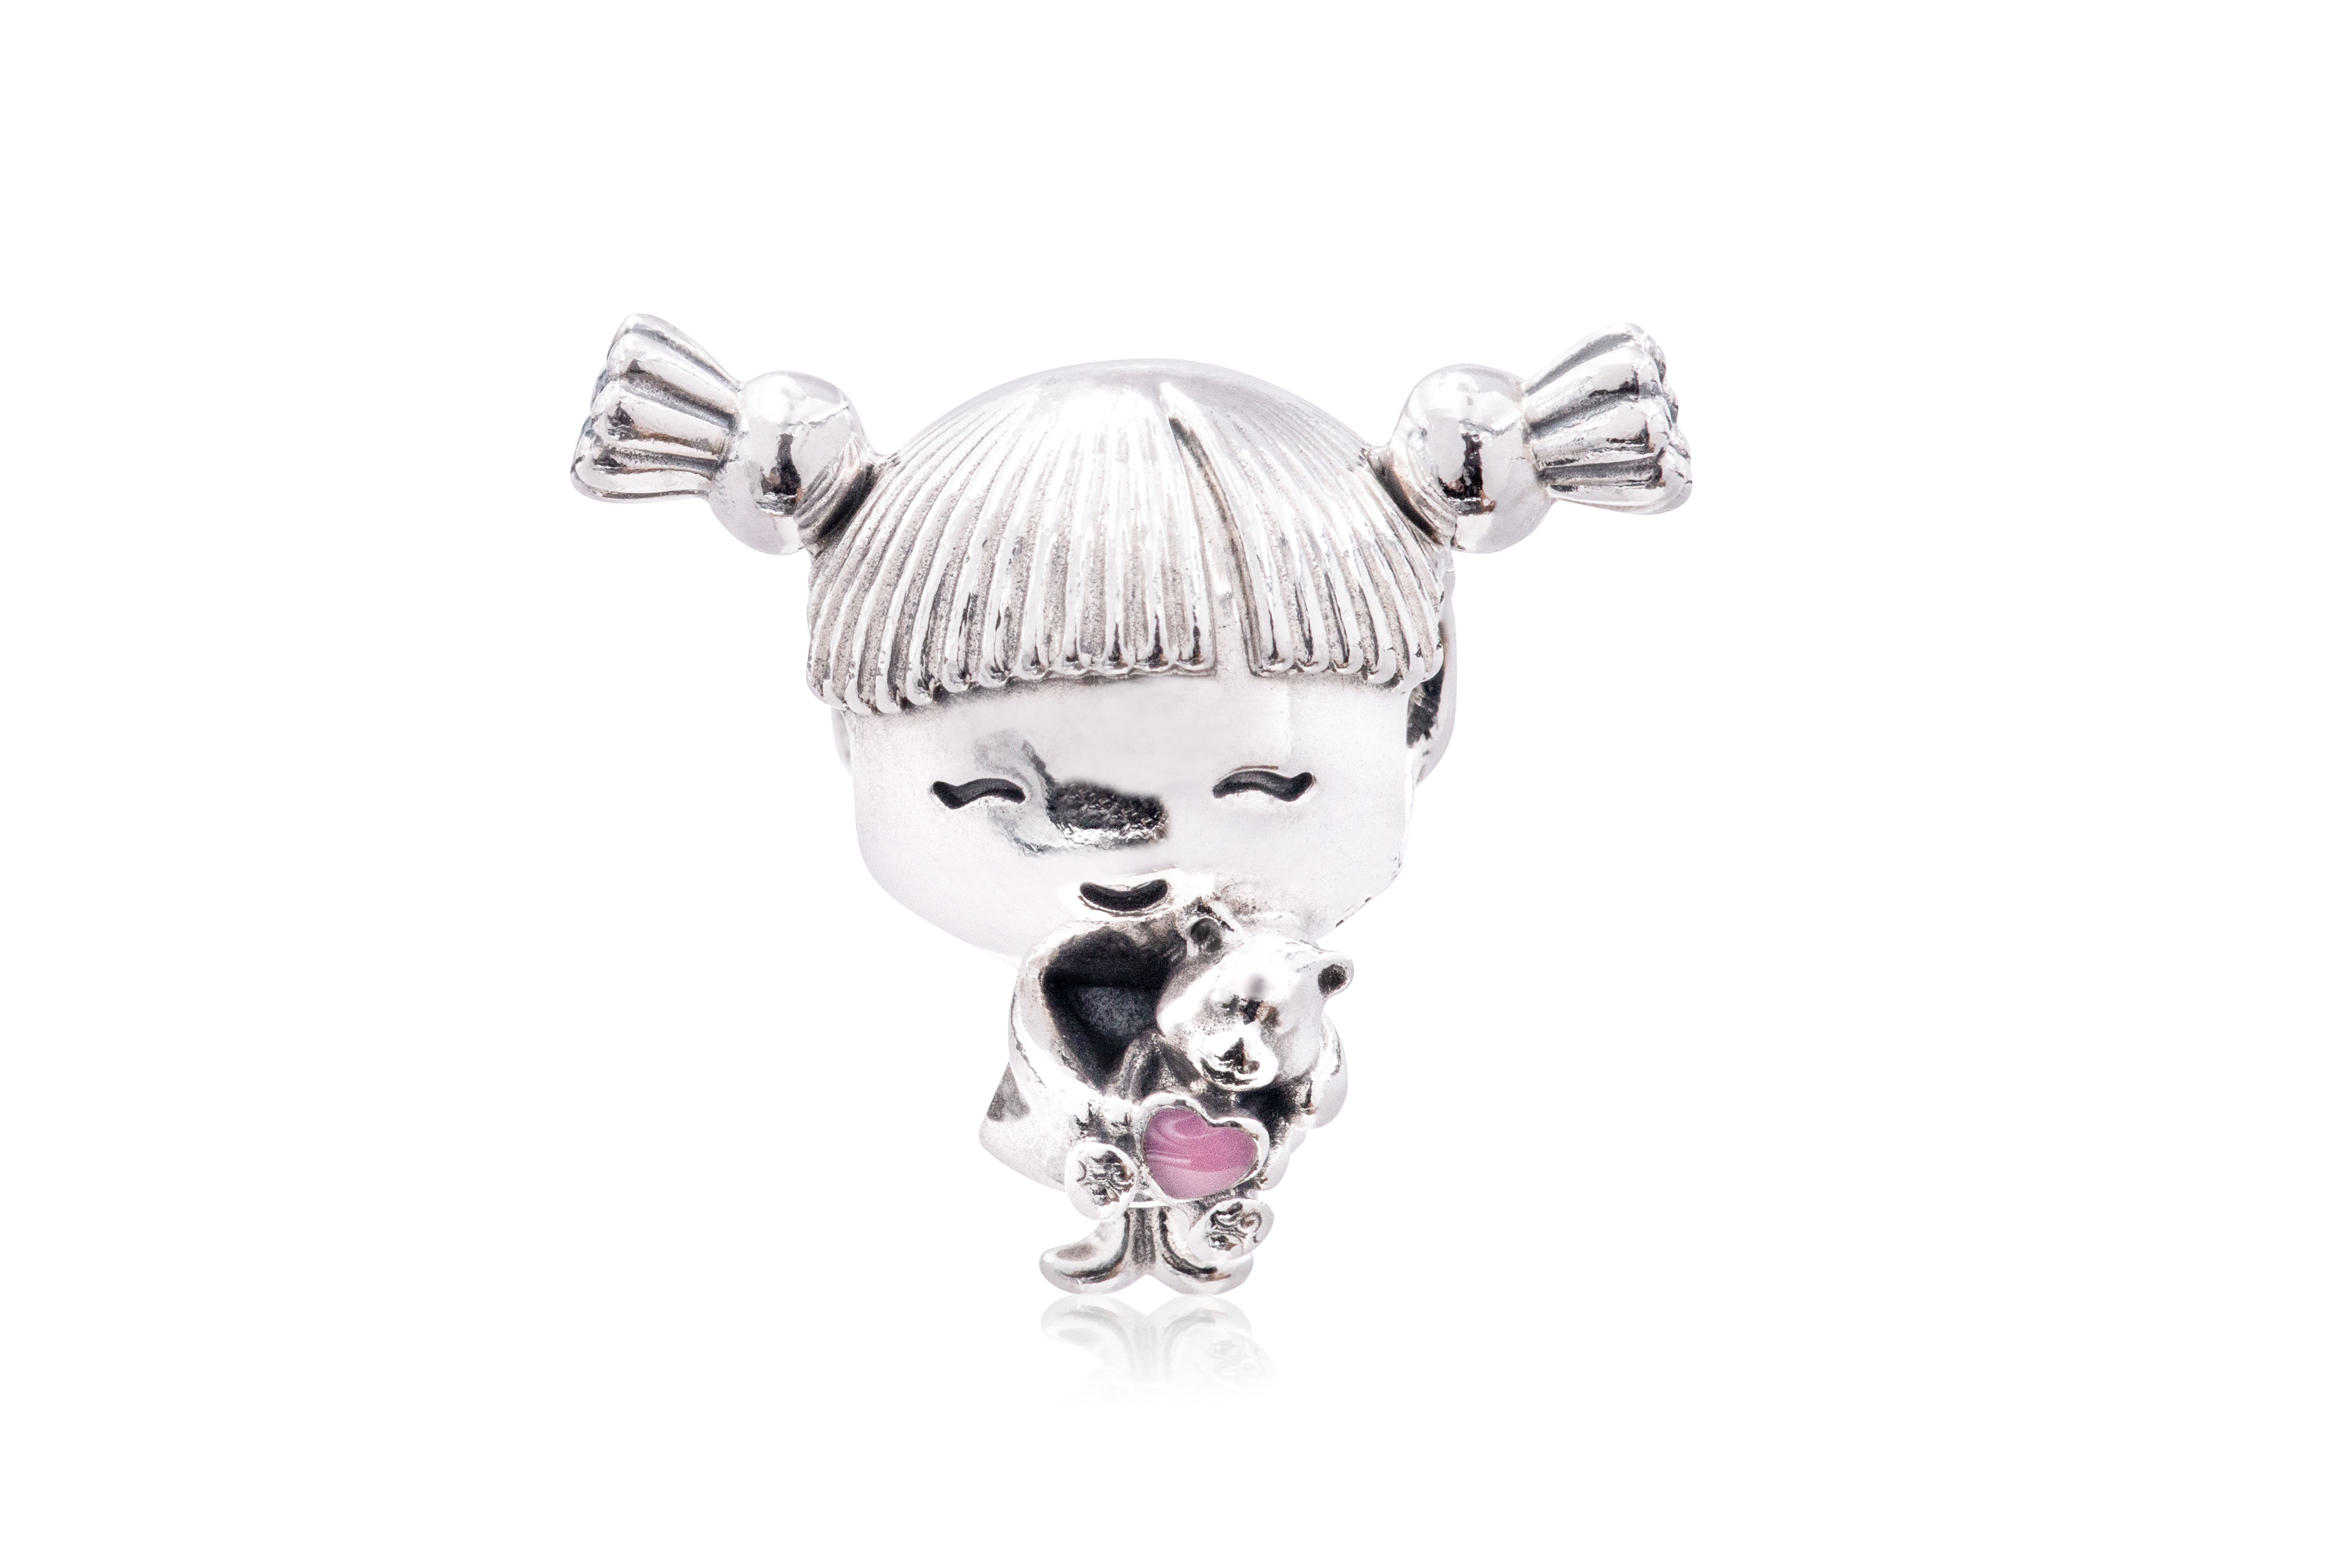 PANDORA Girl with Pigtails Charm - 798016EN160